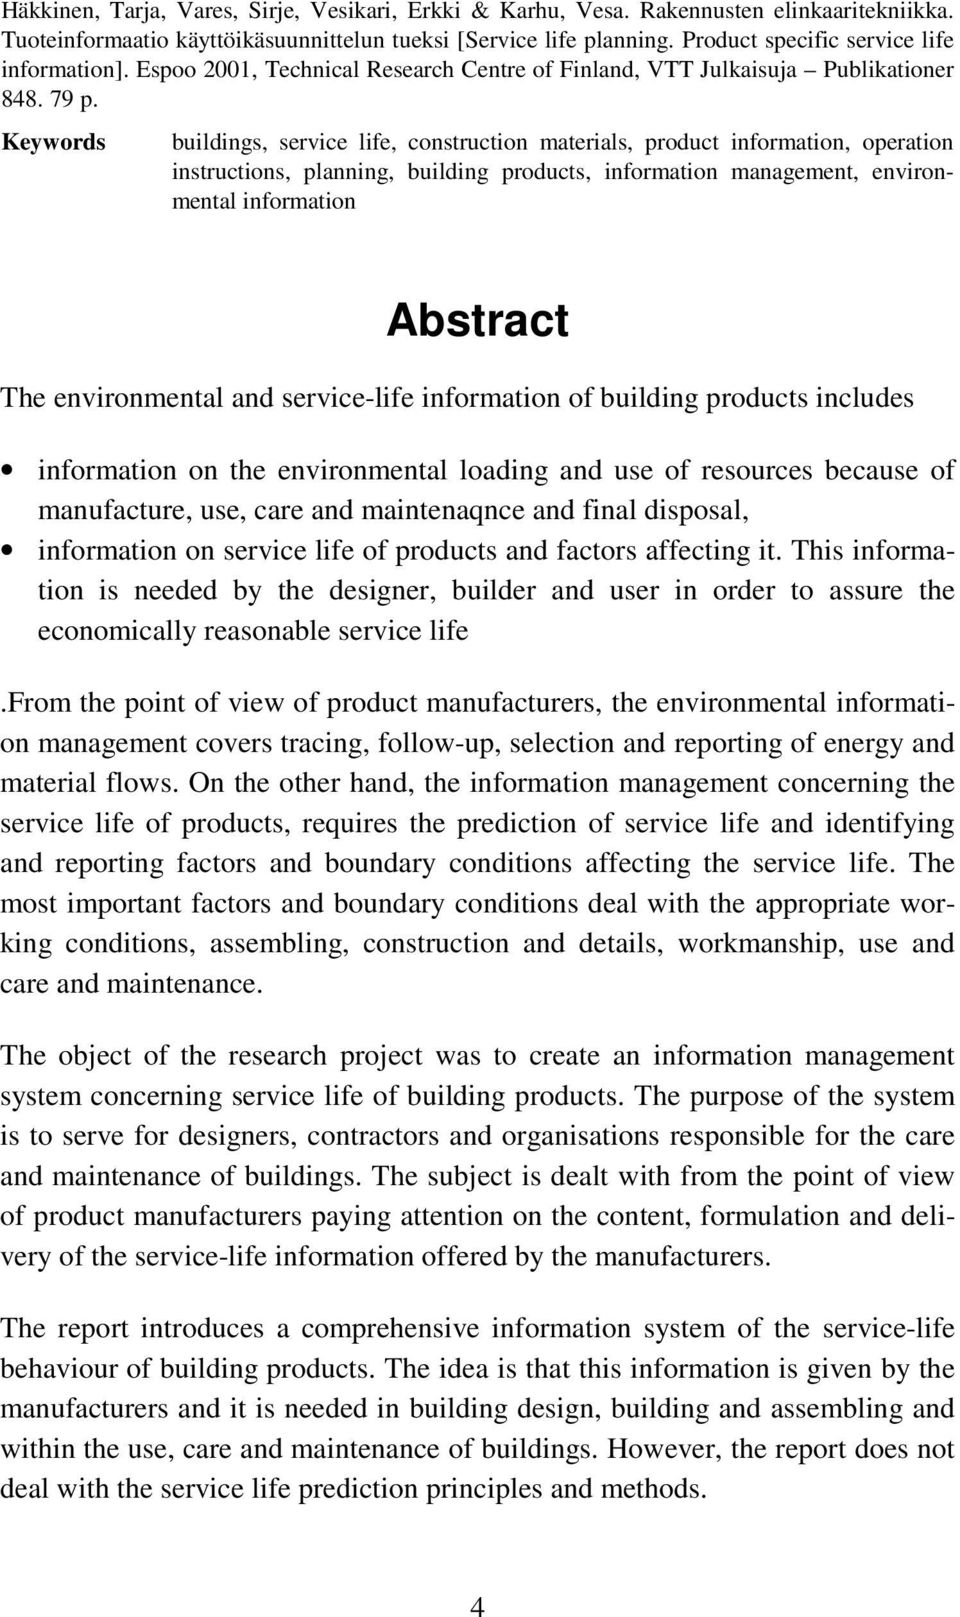 Keywords buildings, service life, construction materials, product information, operation instructions, planning, building products, information management, environmental information Abstract The